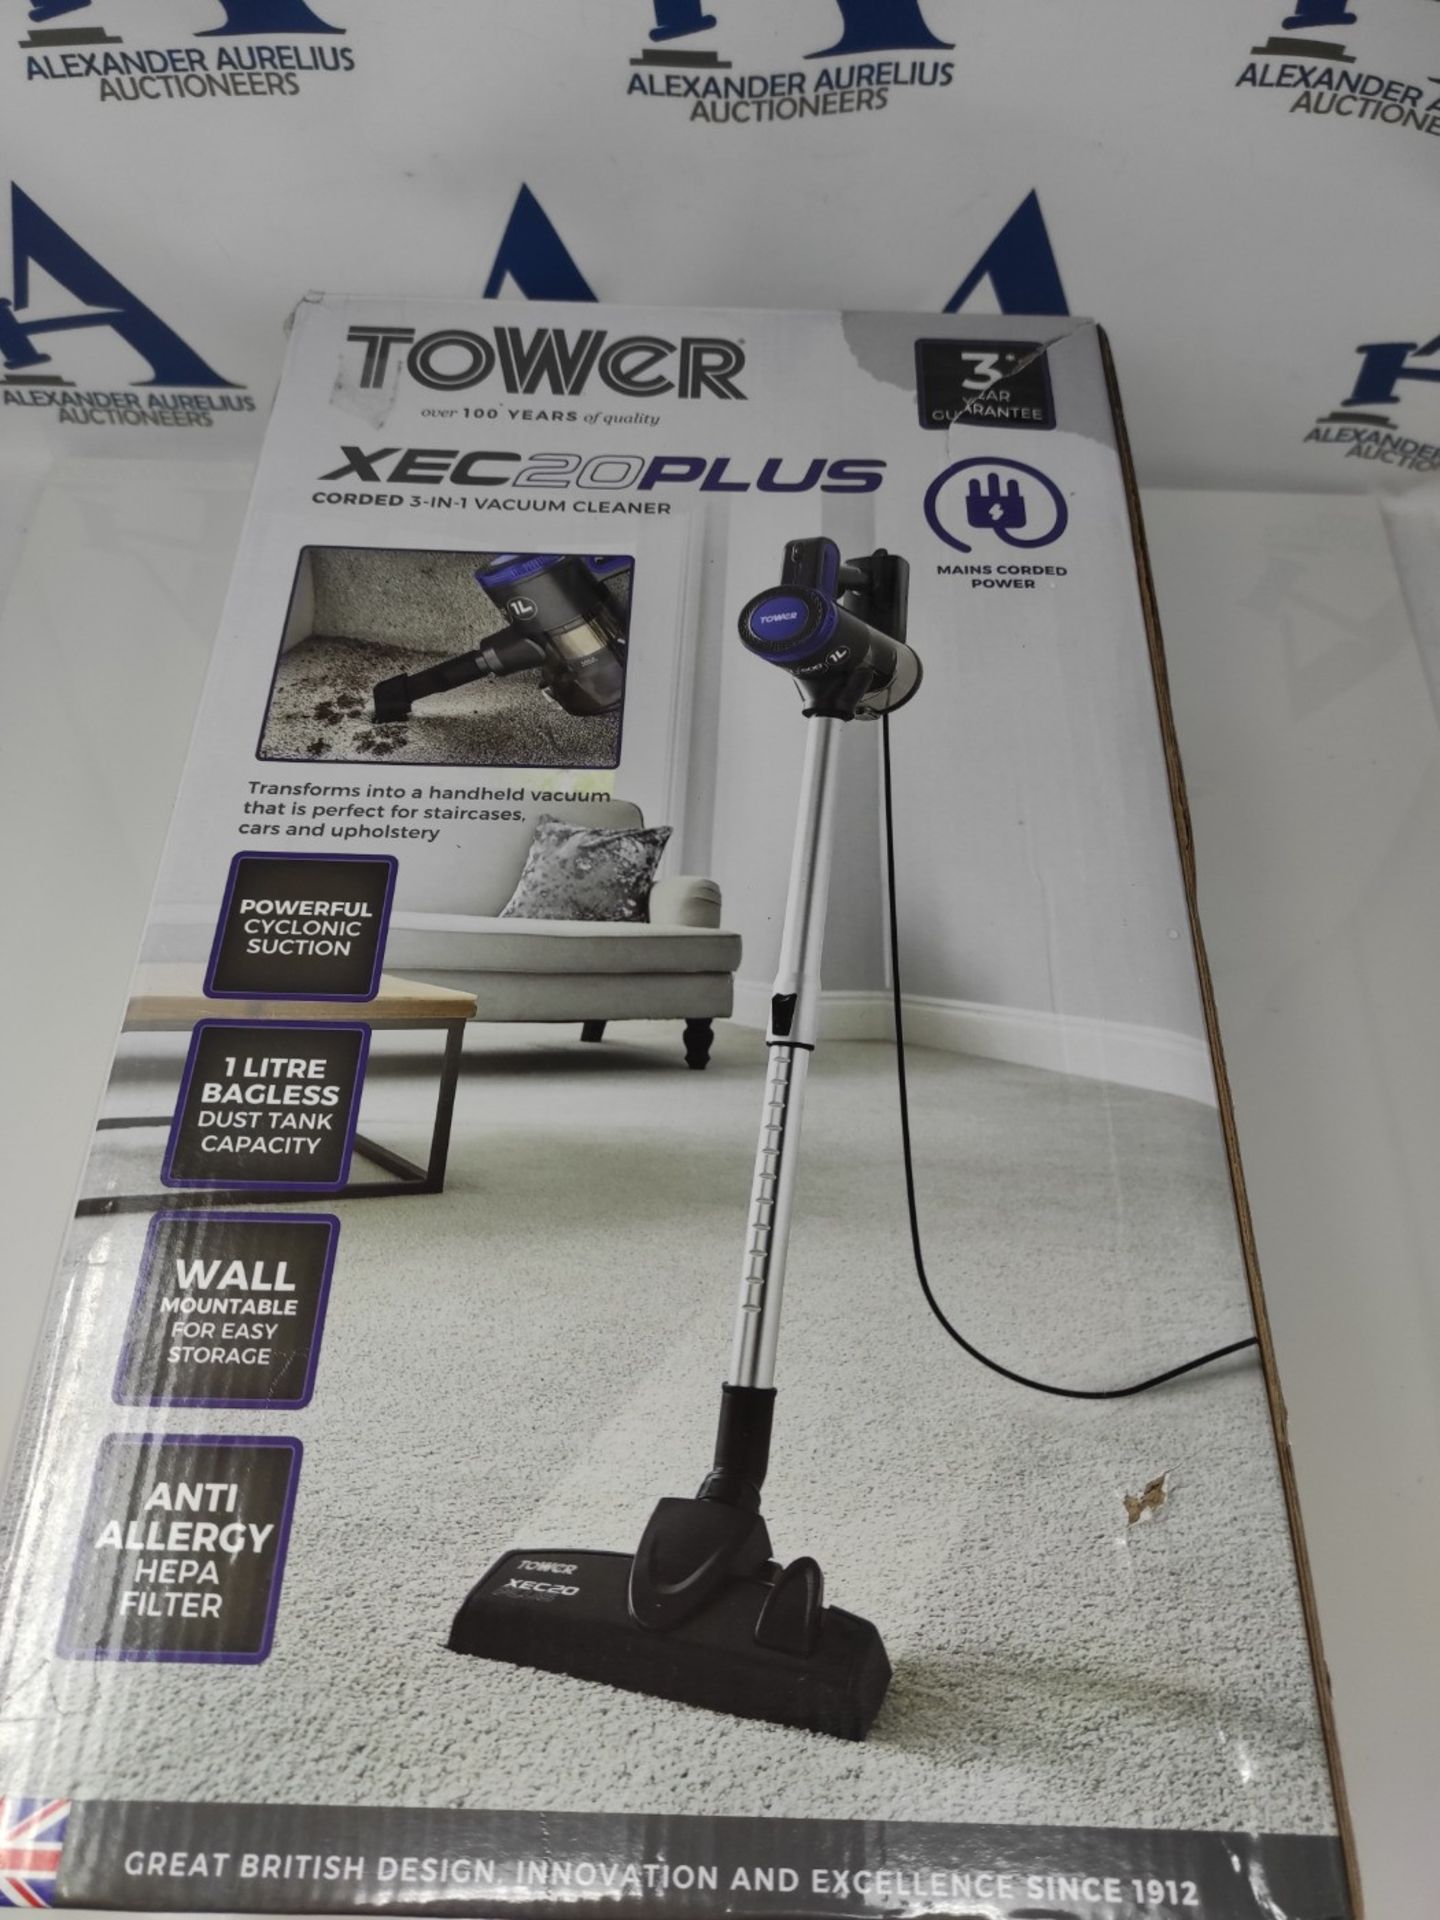 Tower T513005 Pro XEC20 Corded 3-in-1 Vacuum Cleaner with Cyclonic Suction, Built-in H - Bild 2 aus 3